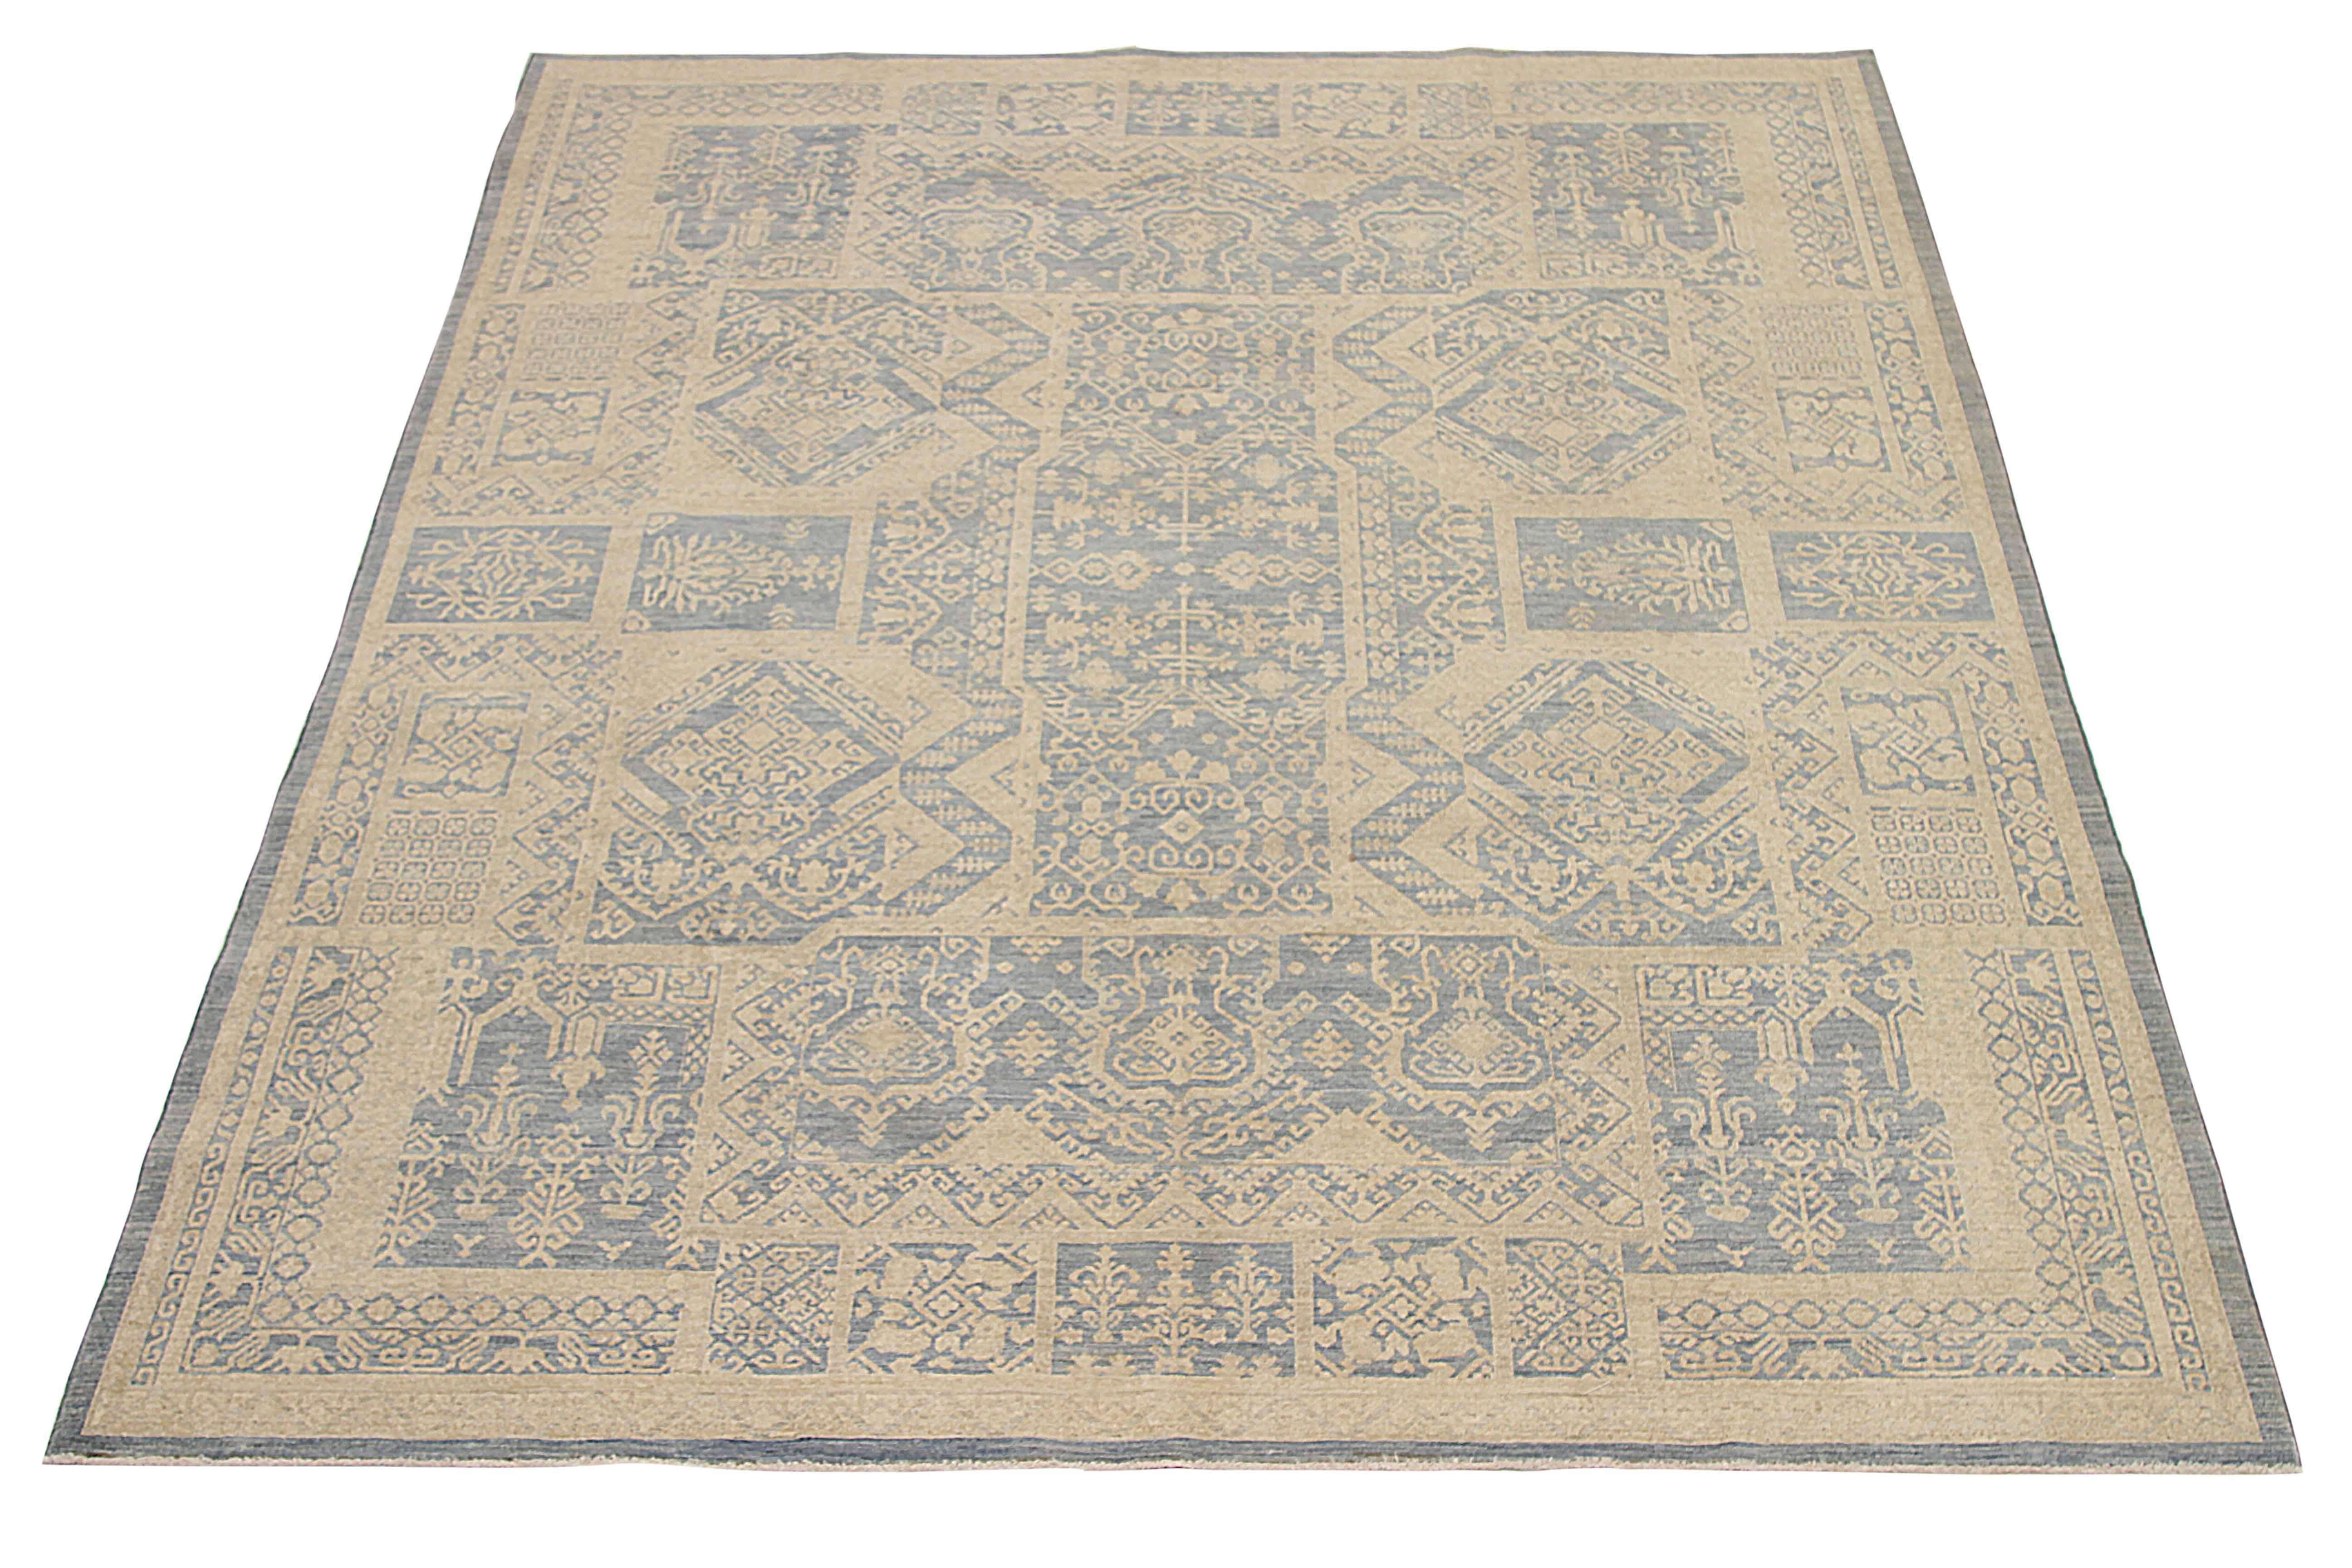 New afghan area rug handwoven from the finest sheep’s wool. It’s colored with all-natural vegetable dyes that are safe for humans and pets. It’s a traditional Tabriz design handwoven by expert artisans. It’s a lovely area rug that can be